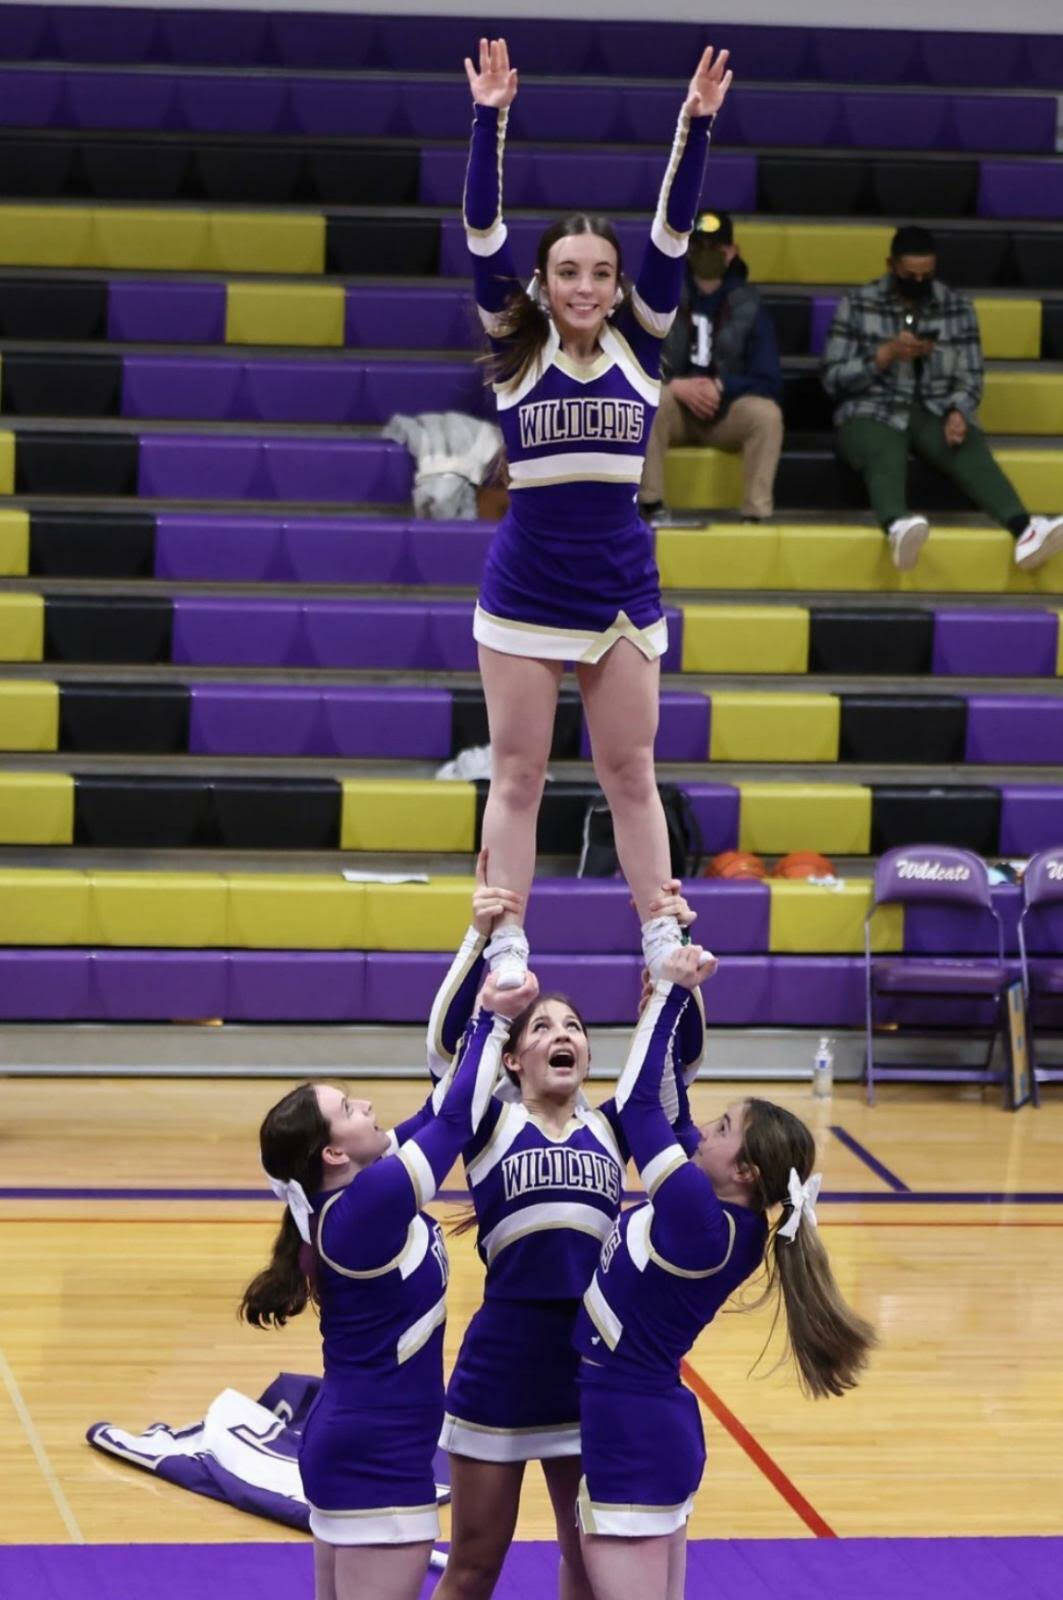 Photo provided
Cassidy Gore, bottom left, and Ava Vallencourt, top, cheer at a basketball game.